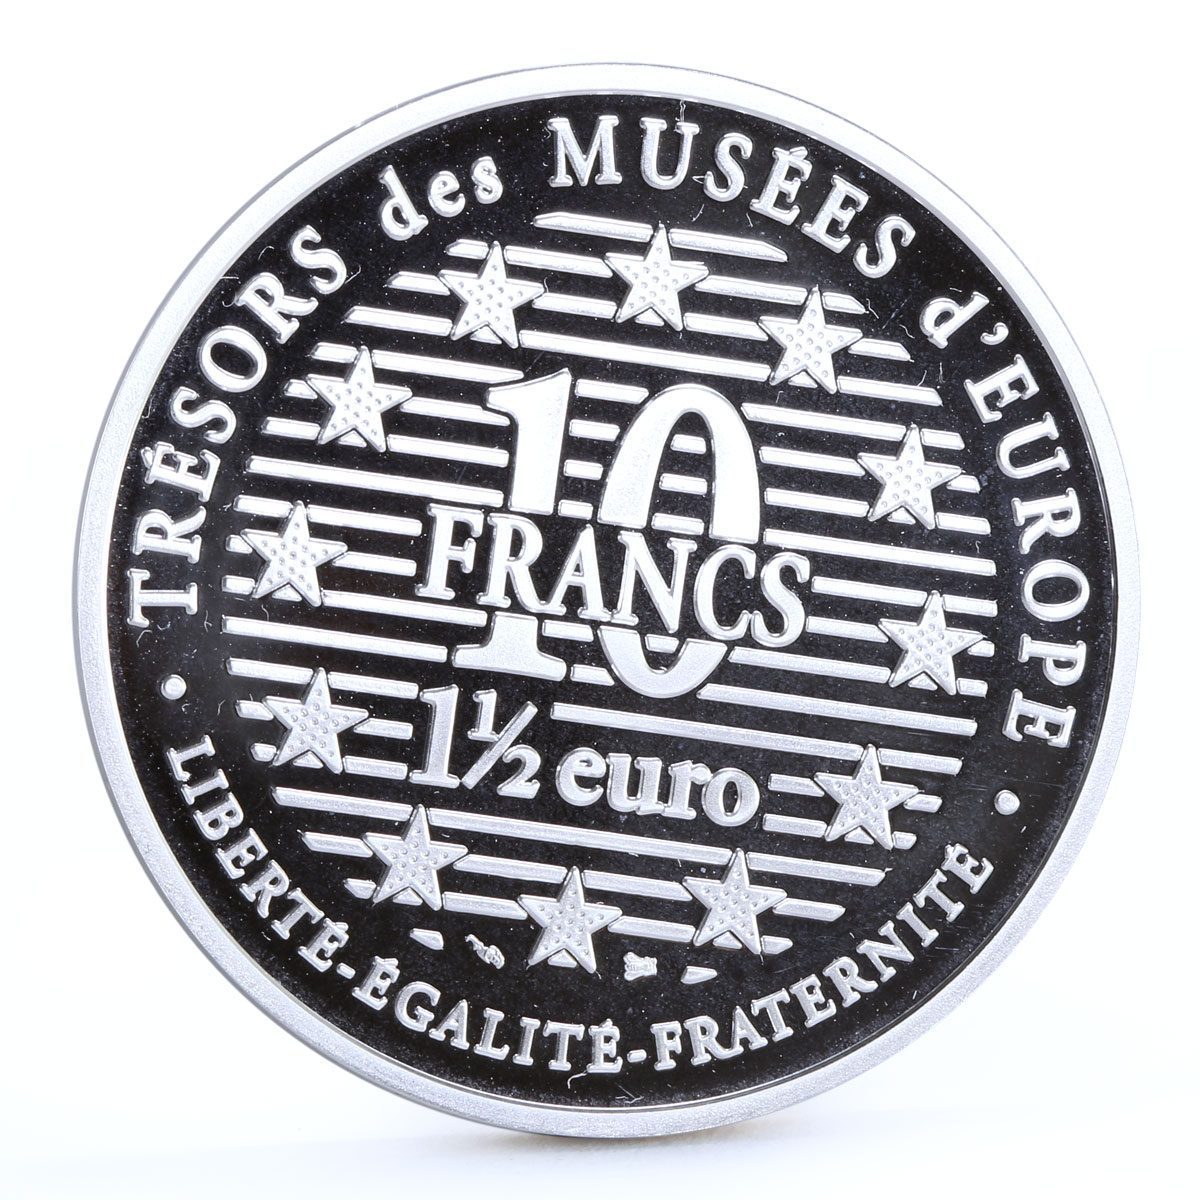 France 10 francs European Museums Treasures Chinese Horseman silver coin 1996